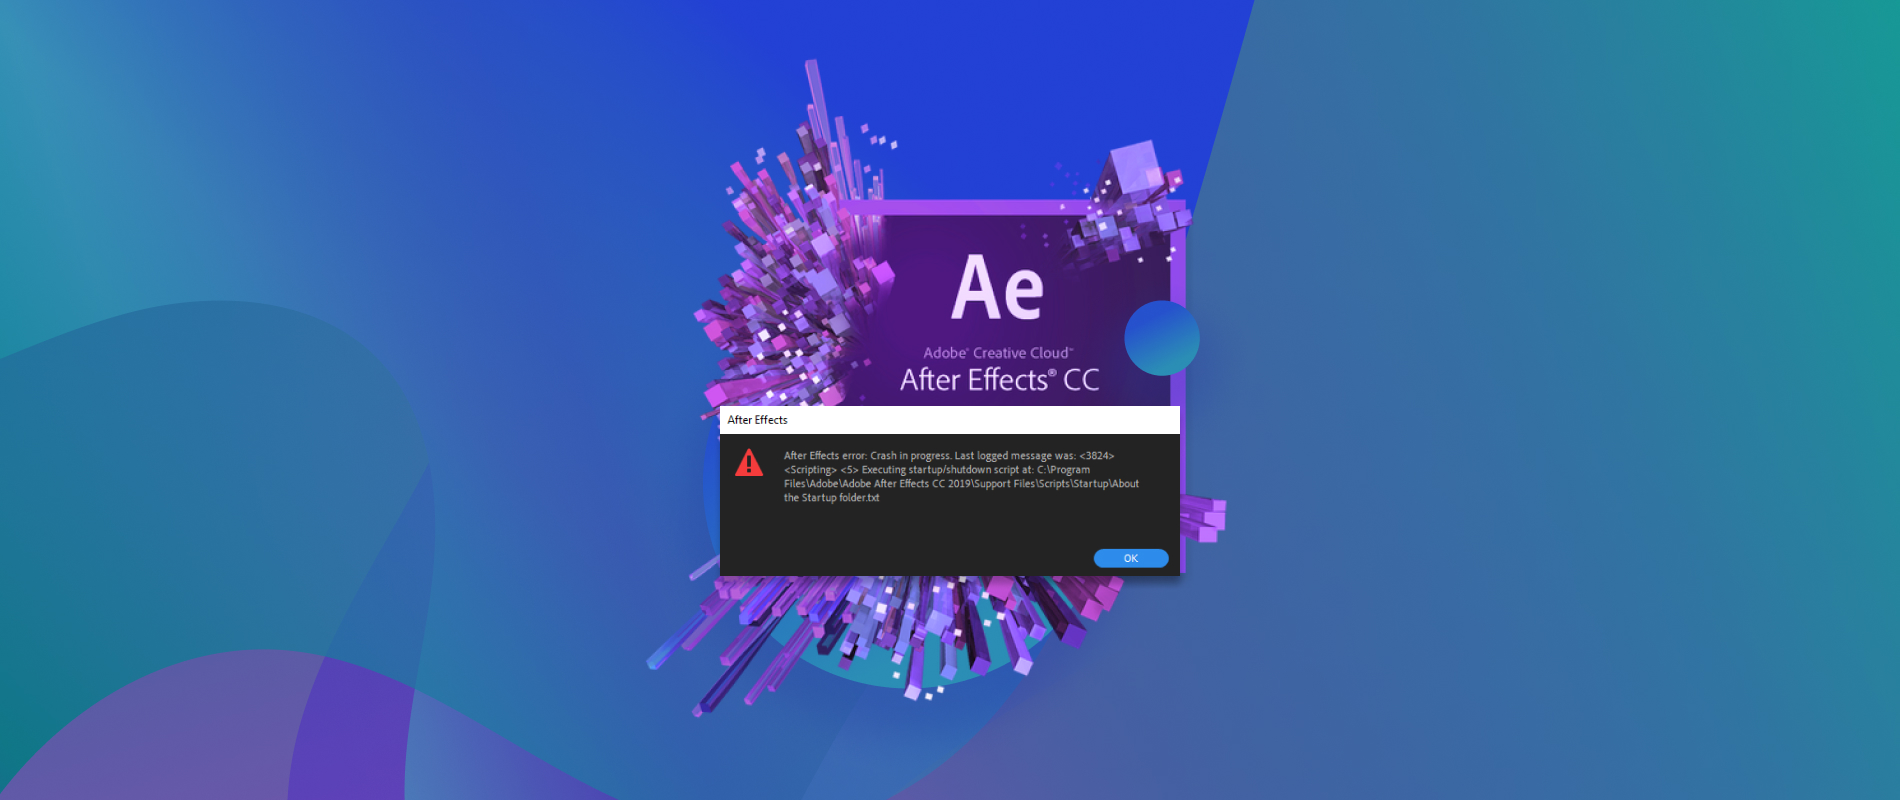 Проекты Афтер эффект. Adobe after Effects Projects Medical. Support effect